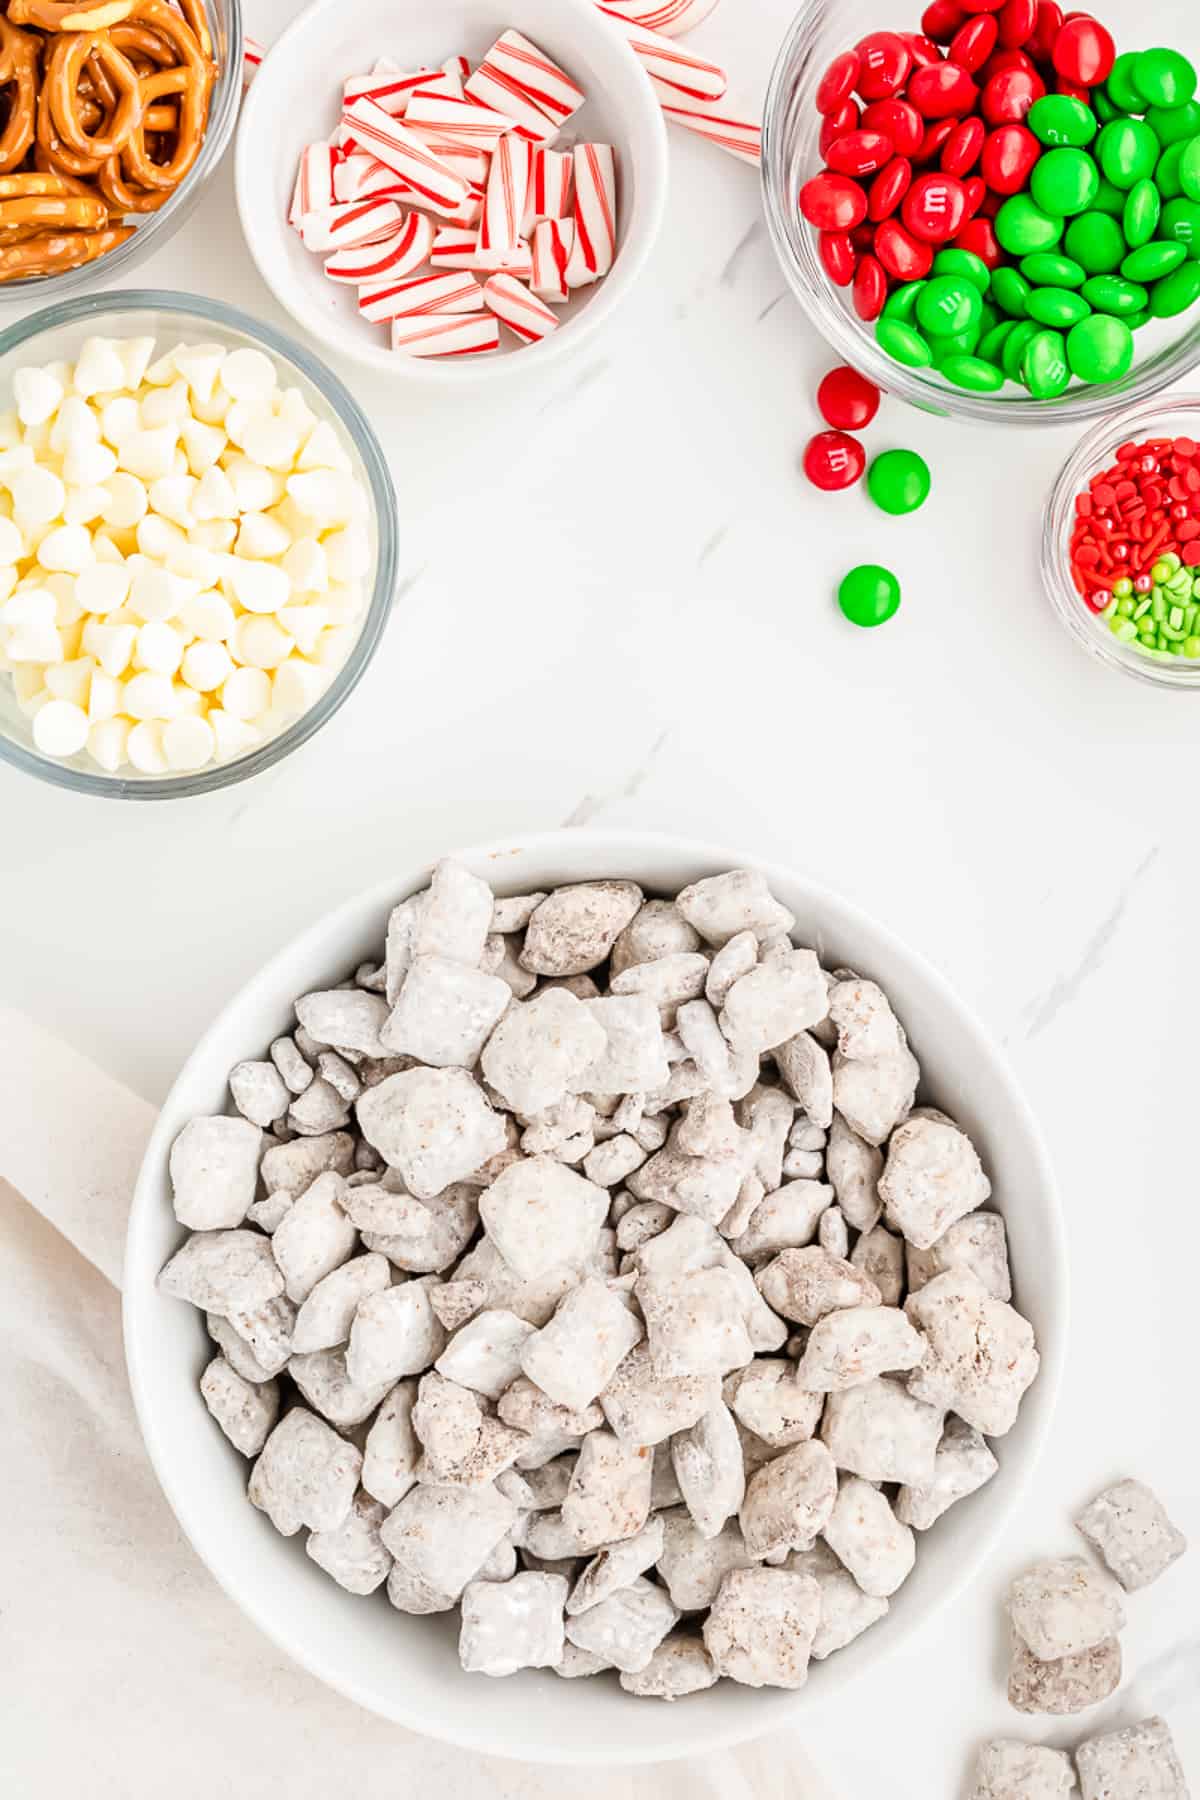 Powdered sugar coated cereal in a large bowl from overhead on a counter with M&Ms, peppermint candy cane pieces, white chocolate chips and pretzels in bowls on the counter nearby.